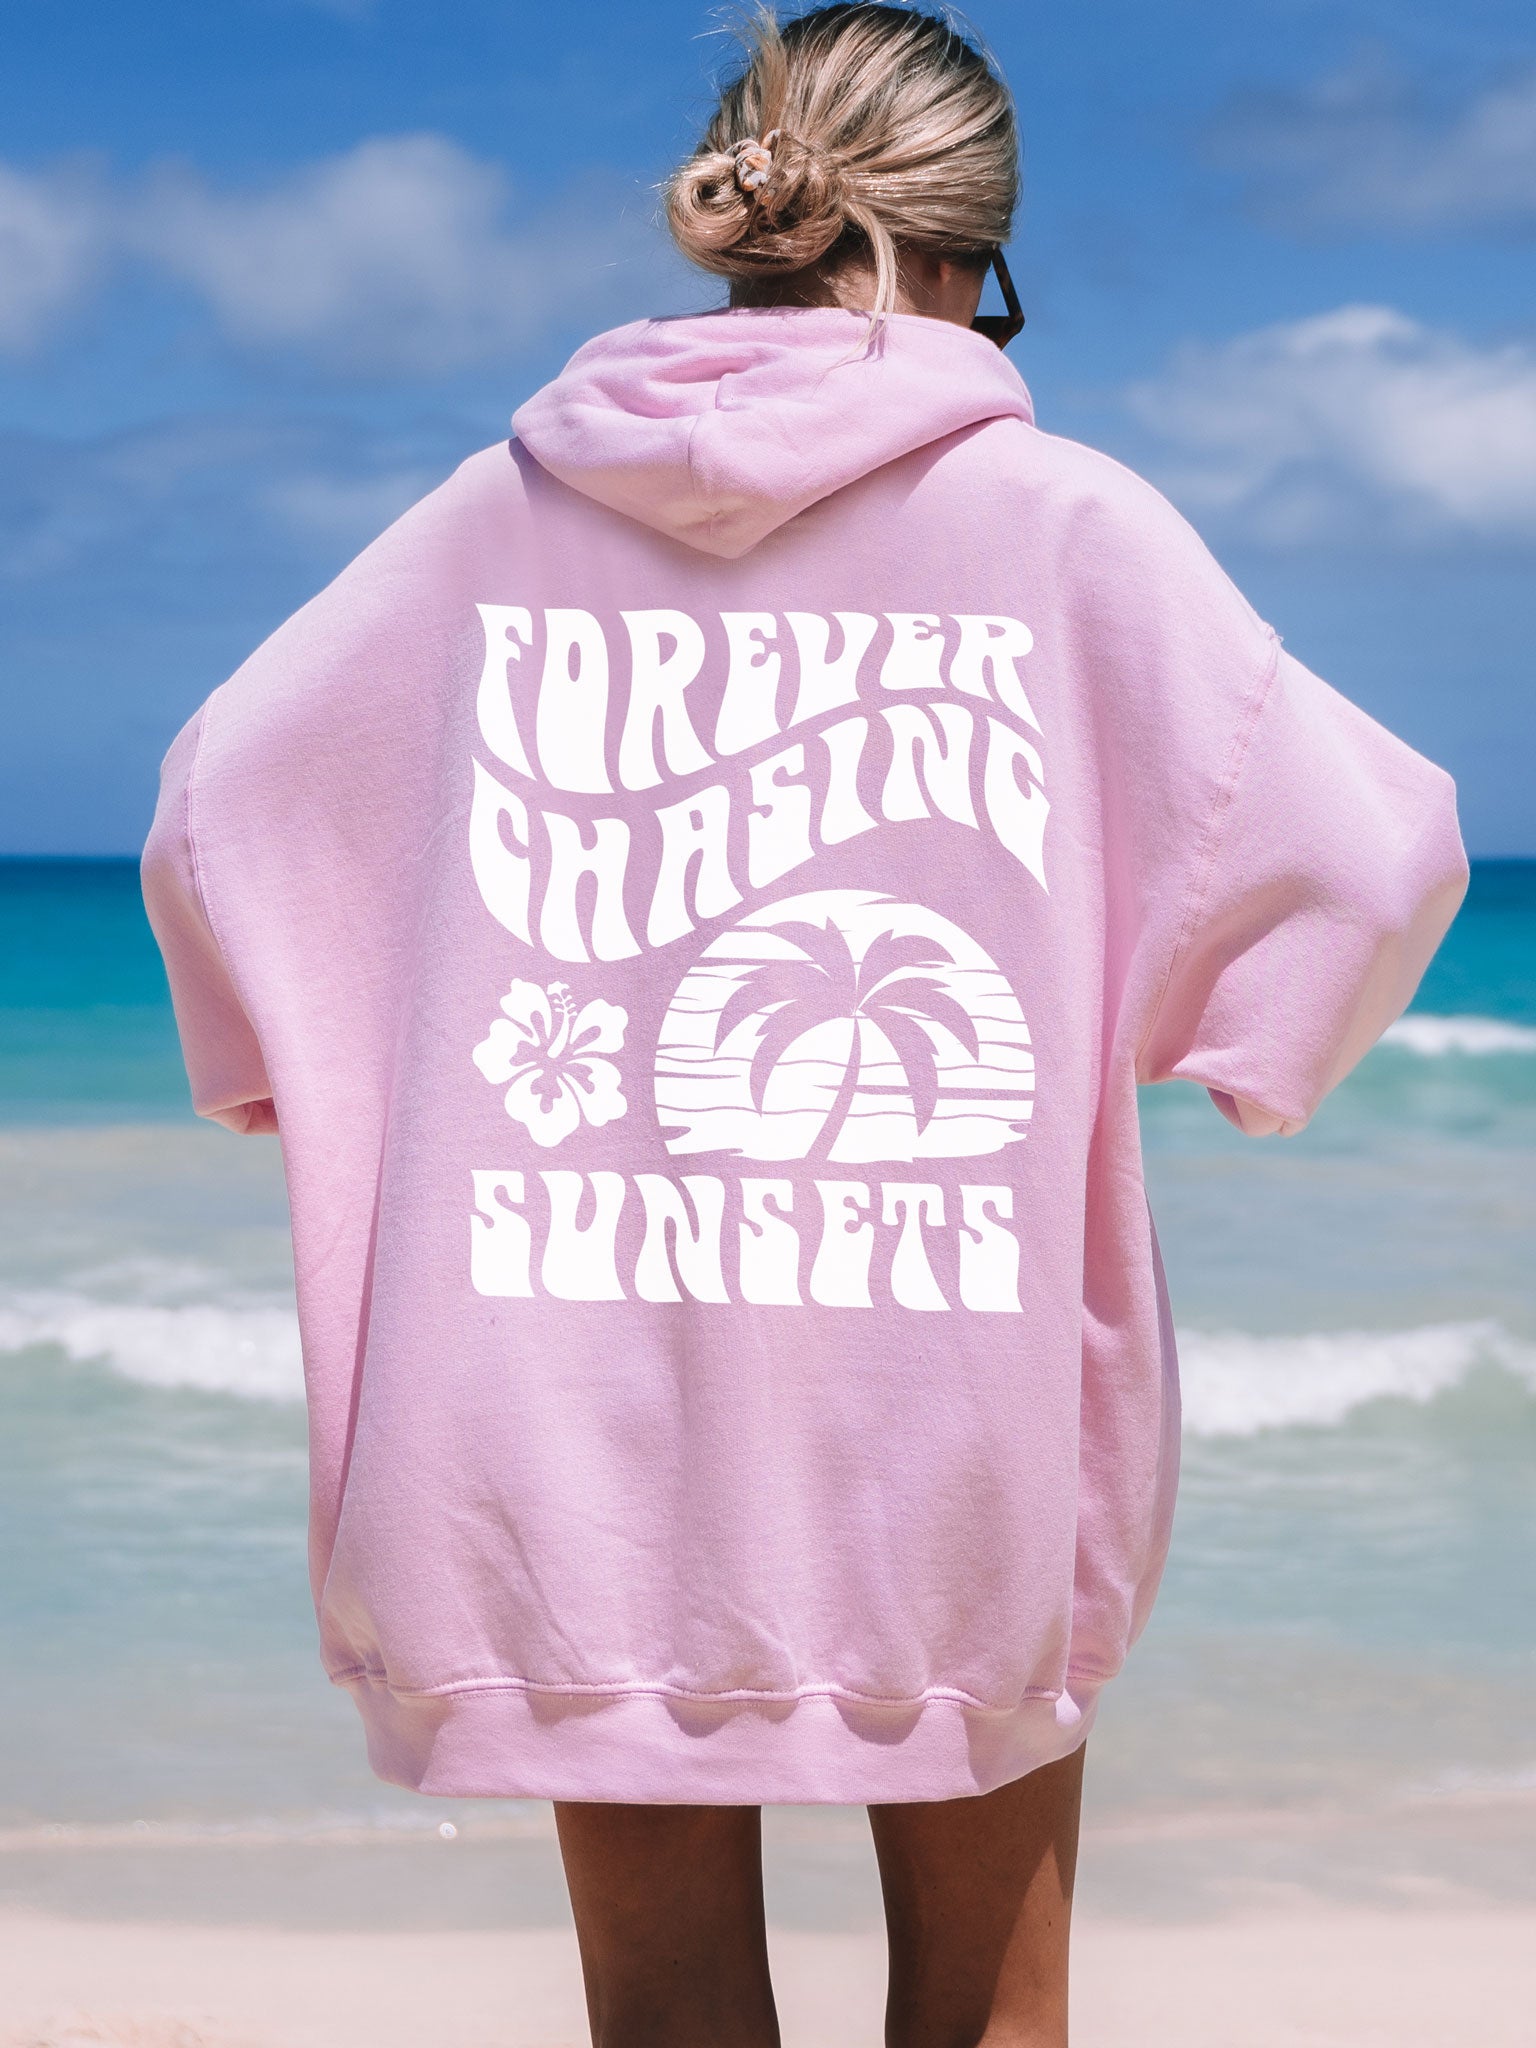 Forever Chasing Sunsets Hoodie Pink with White Ink